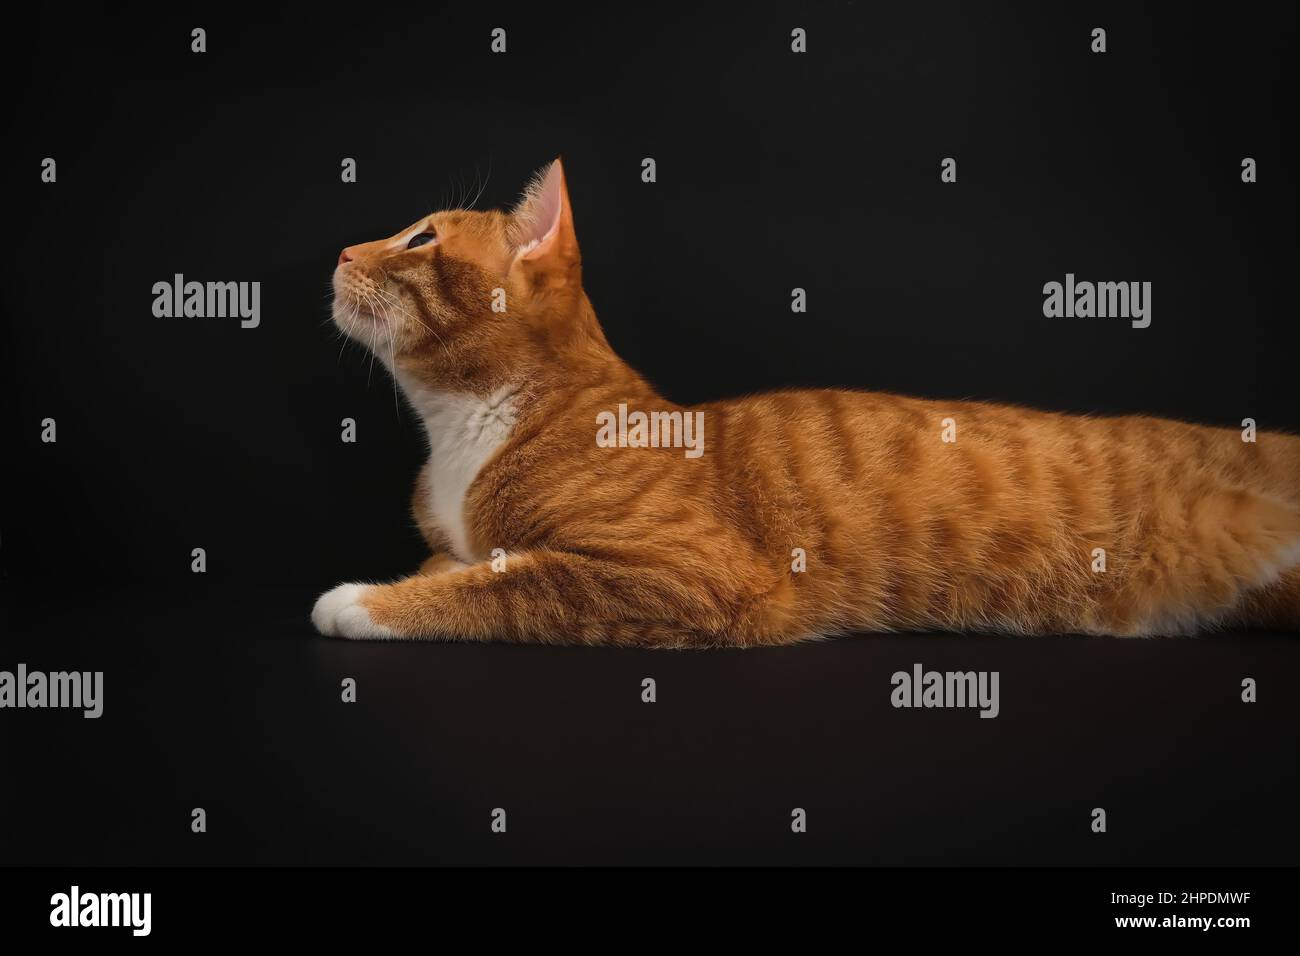 Portrait of young honorable arab ginger tabby cat looking up on black background,side view.Pets. Stock Photo